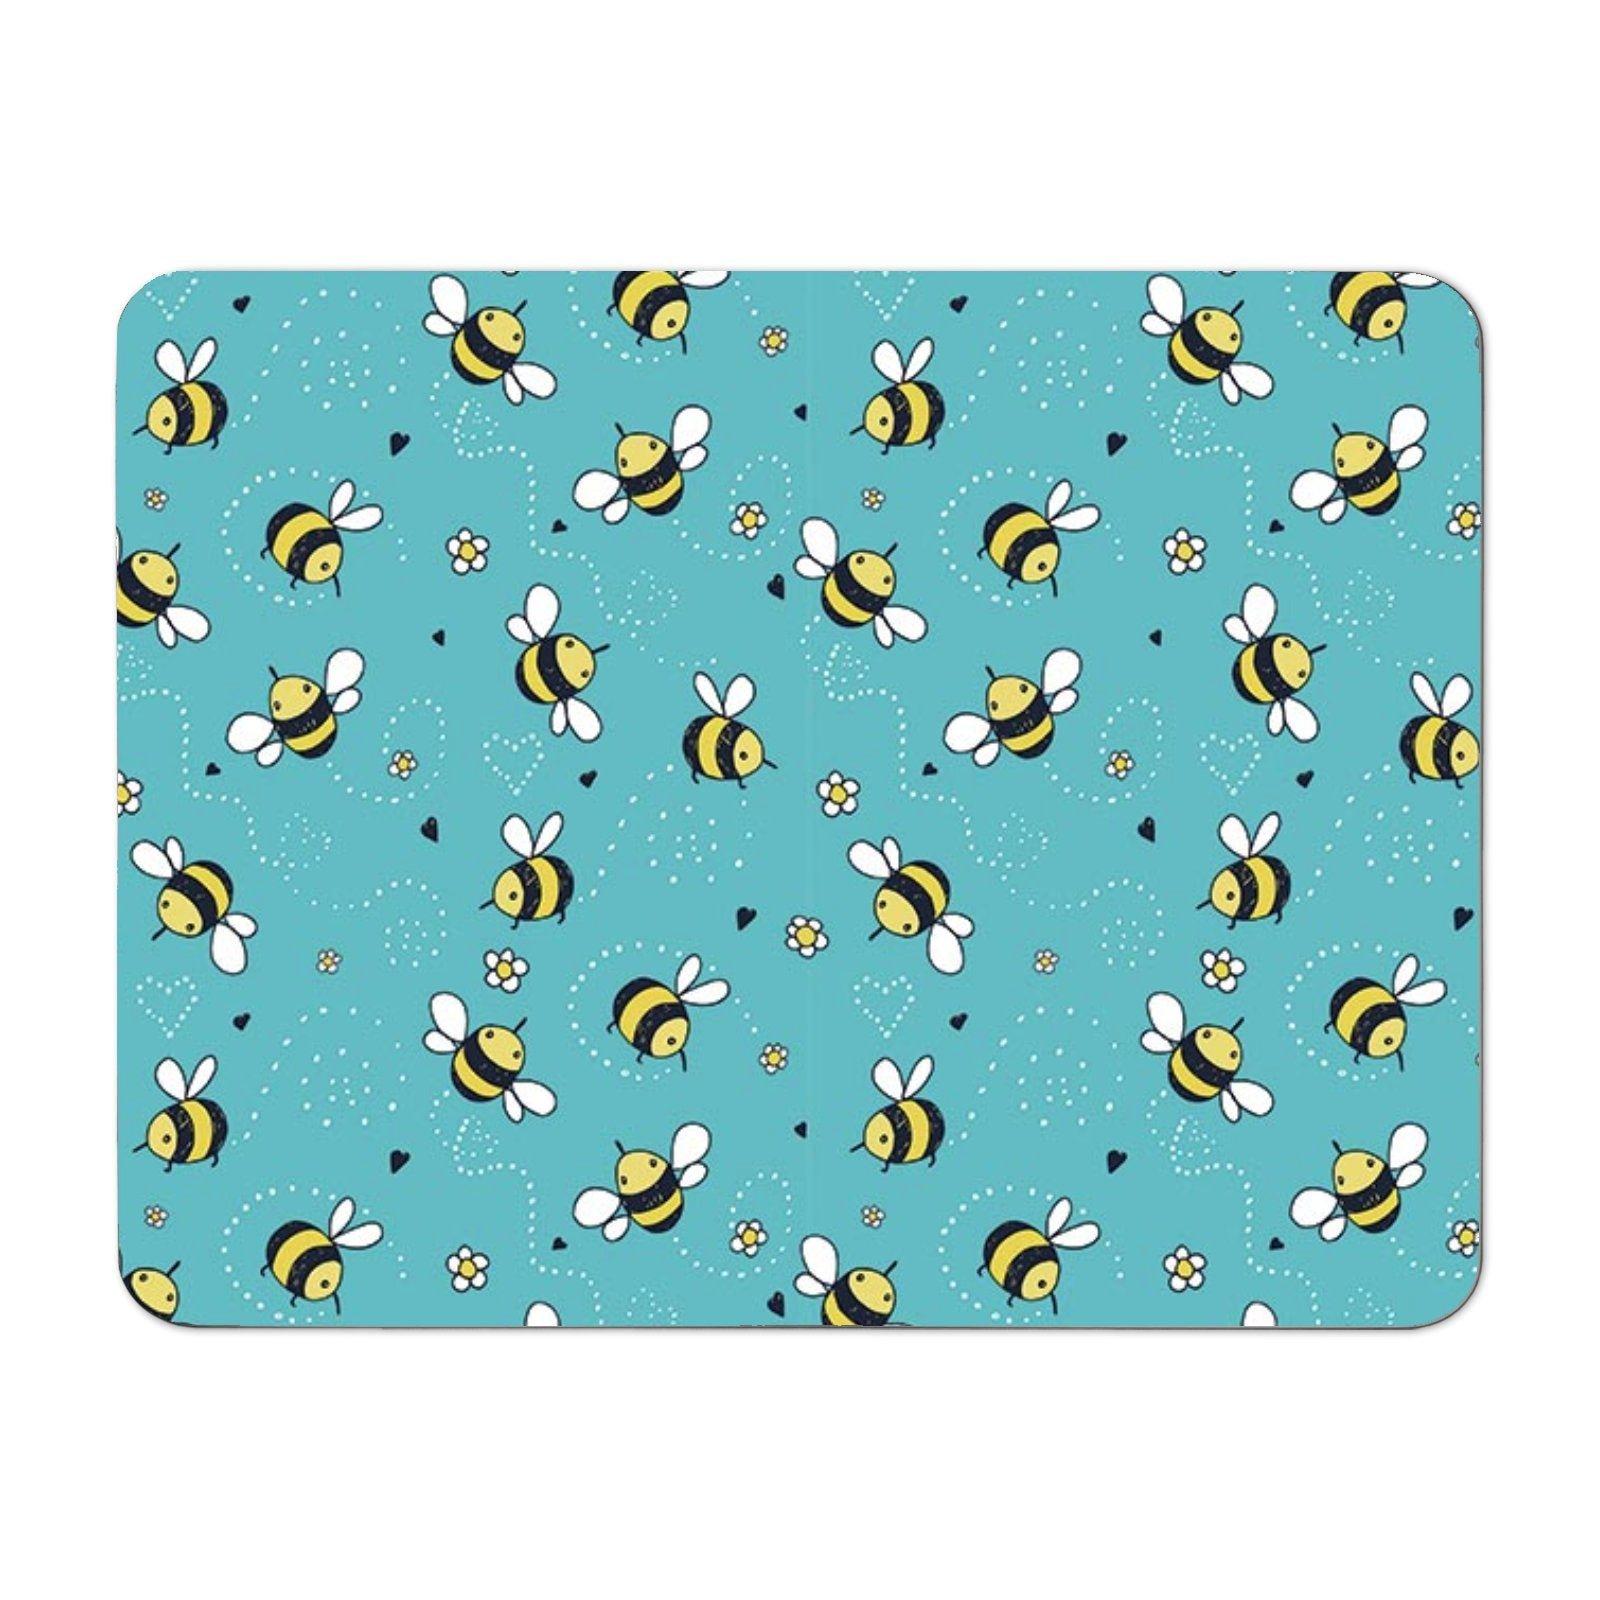 Hand Drawn Busy Bees Placemats